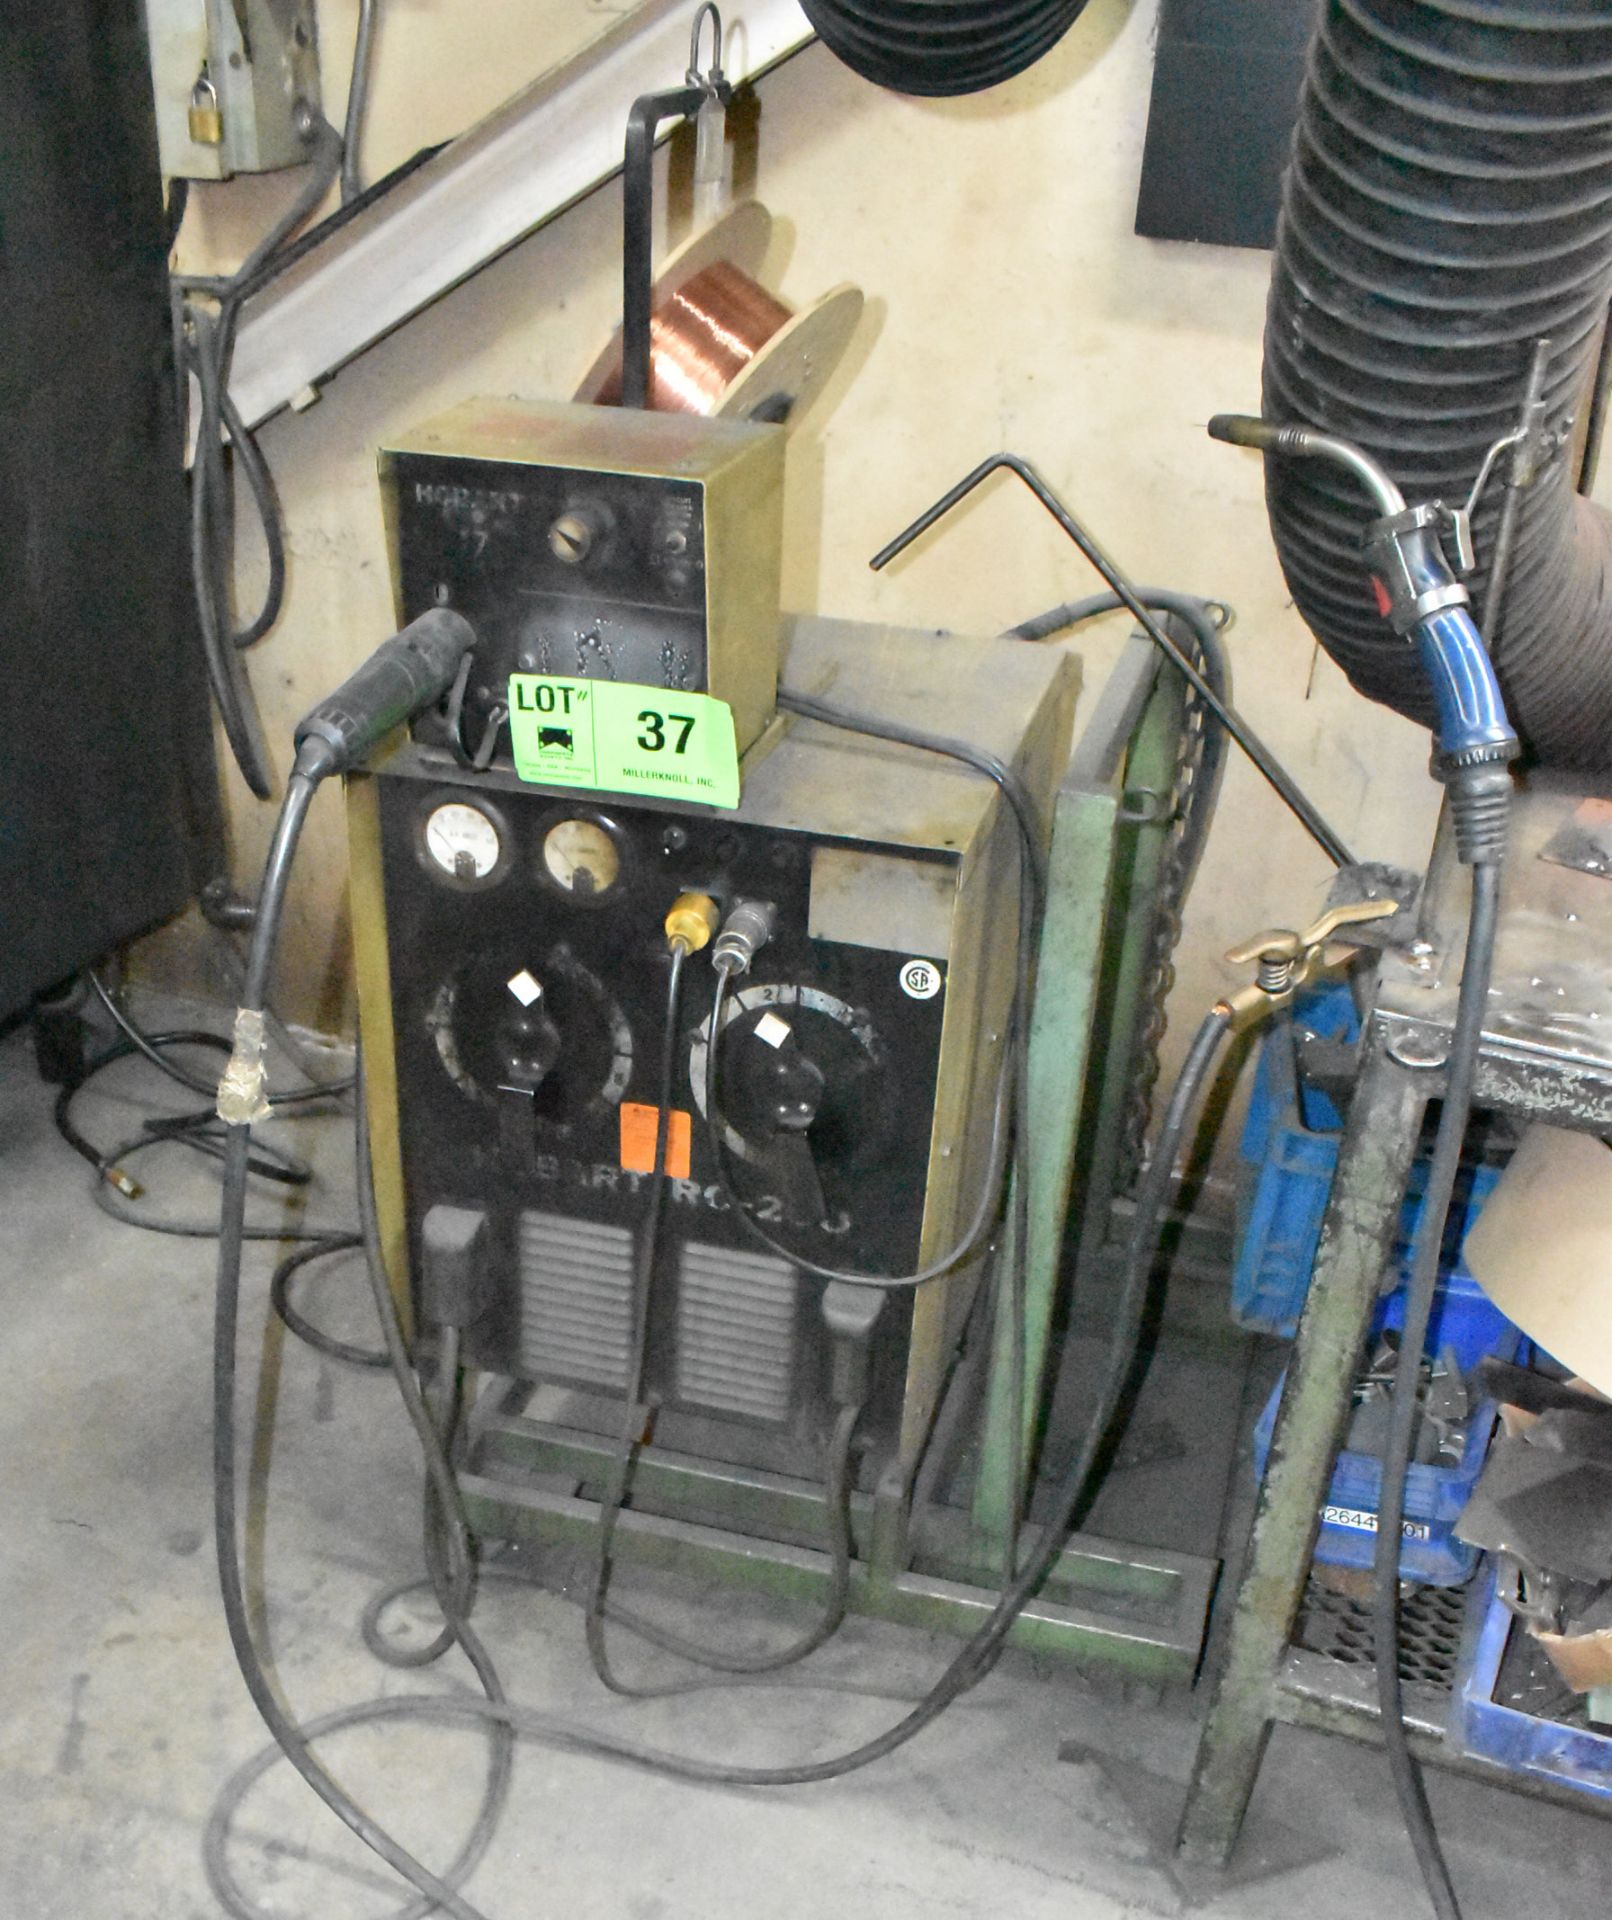 HOBART RC-200 MIG WELDER WITH HOBART 17 WIRE FEEDS, S/N N/A (CI) [RIGGING FEE FOR LOT #37 - $35